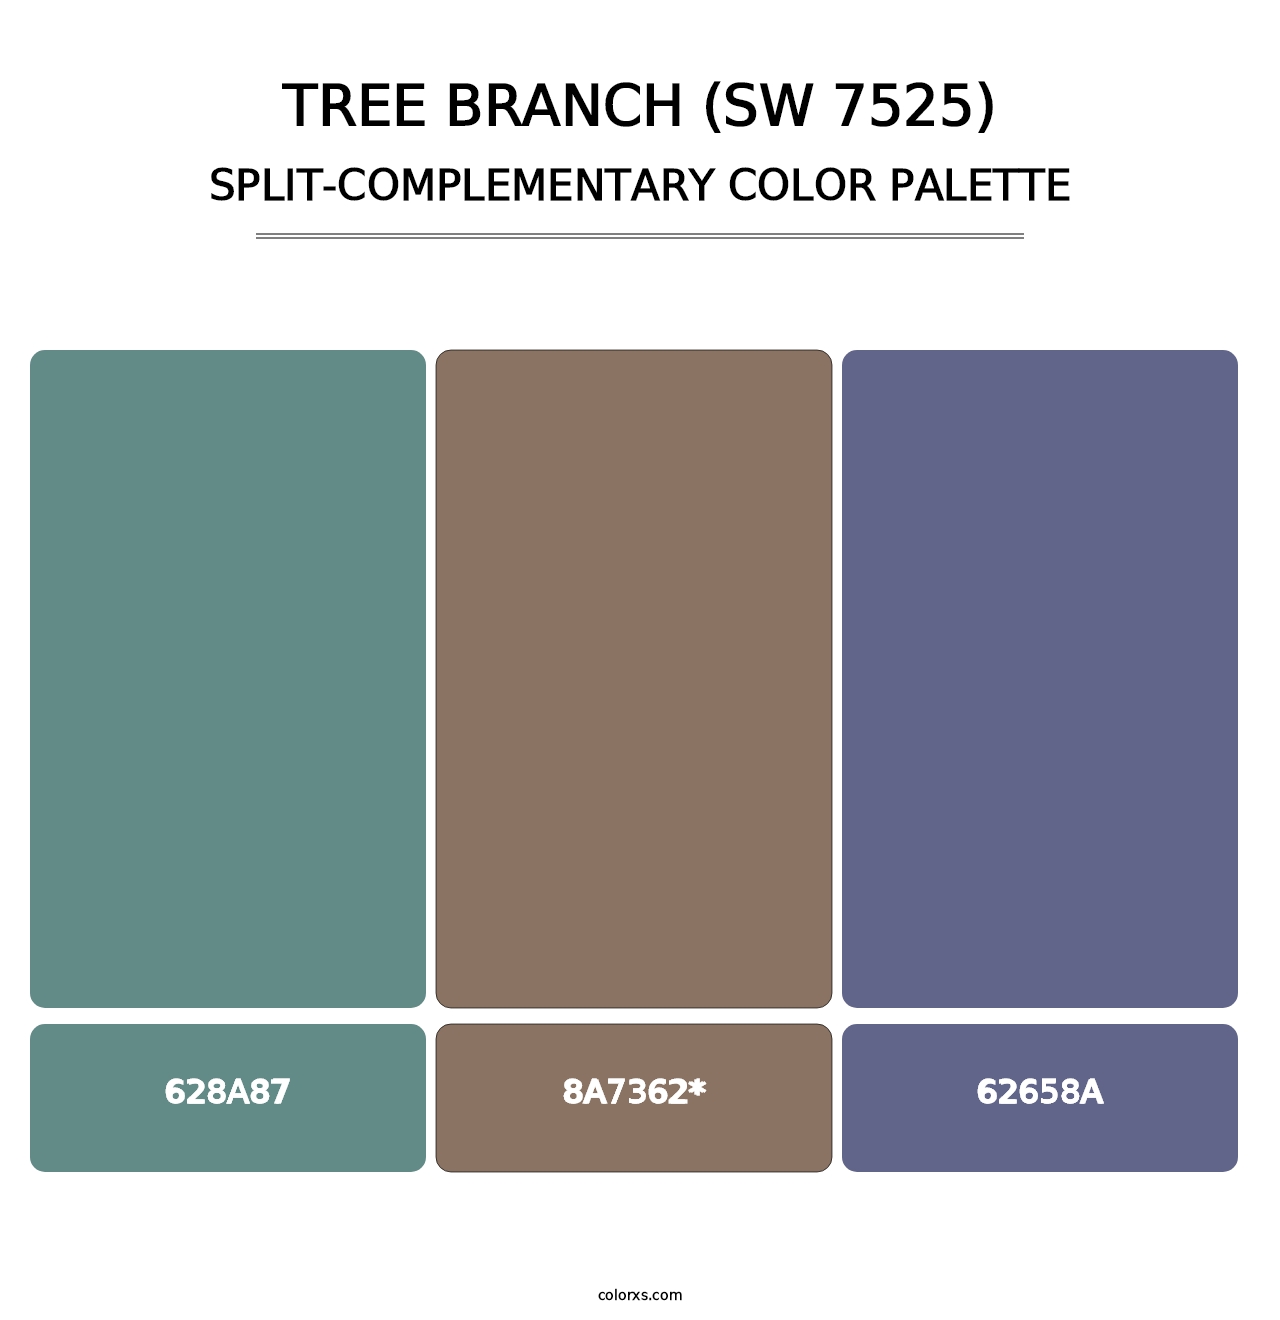 Tree Branch (SW 7525) - Split-Complementary Color Palette